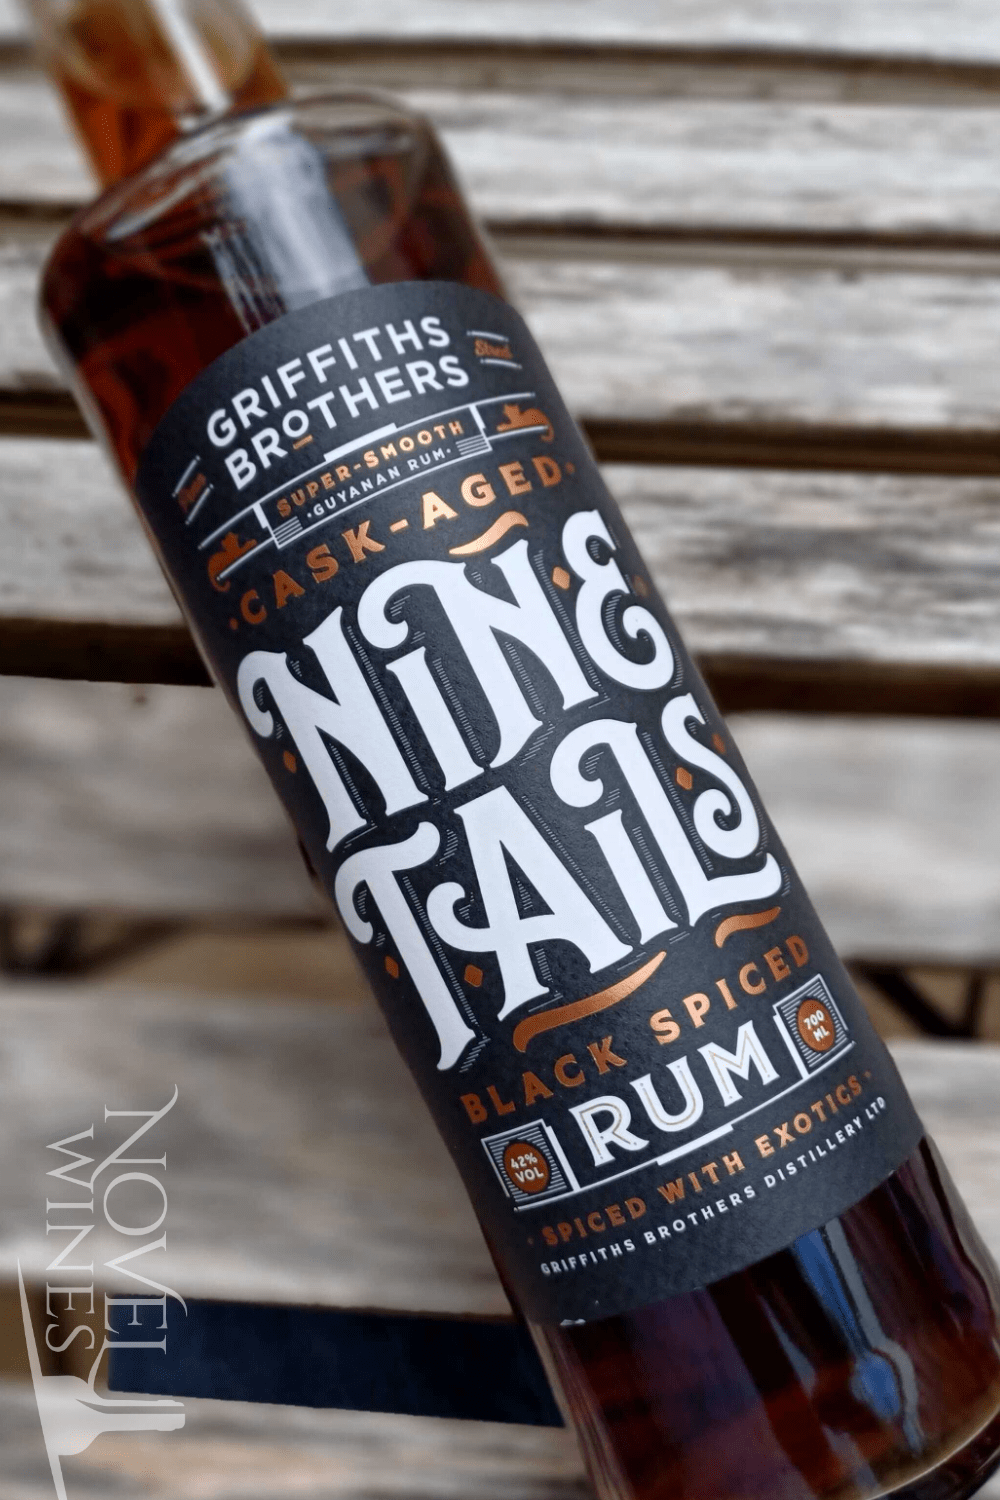 Burning Barn Rum Griffiths Brothers Nine Tails Black Spiced Rum 42.0%, Guyana